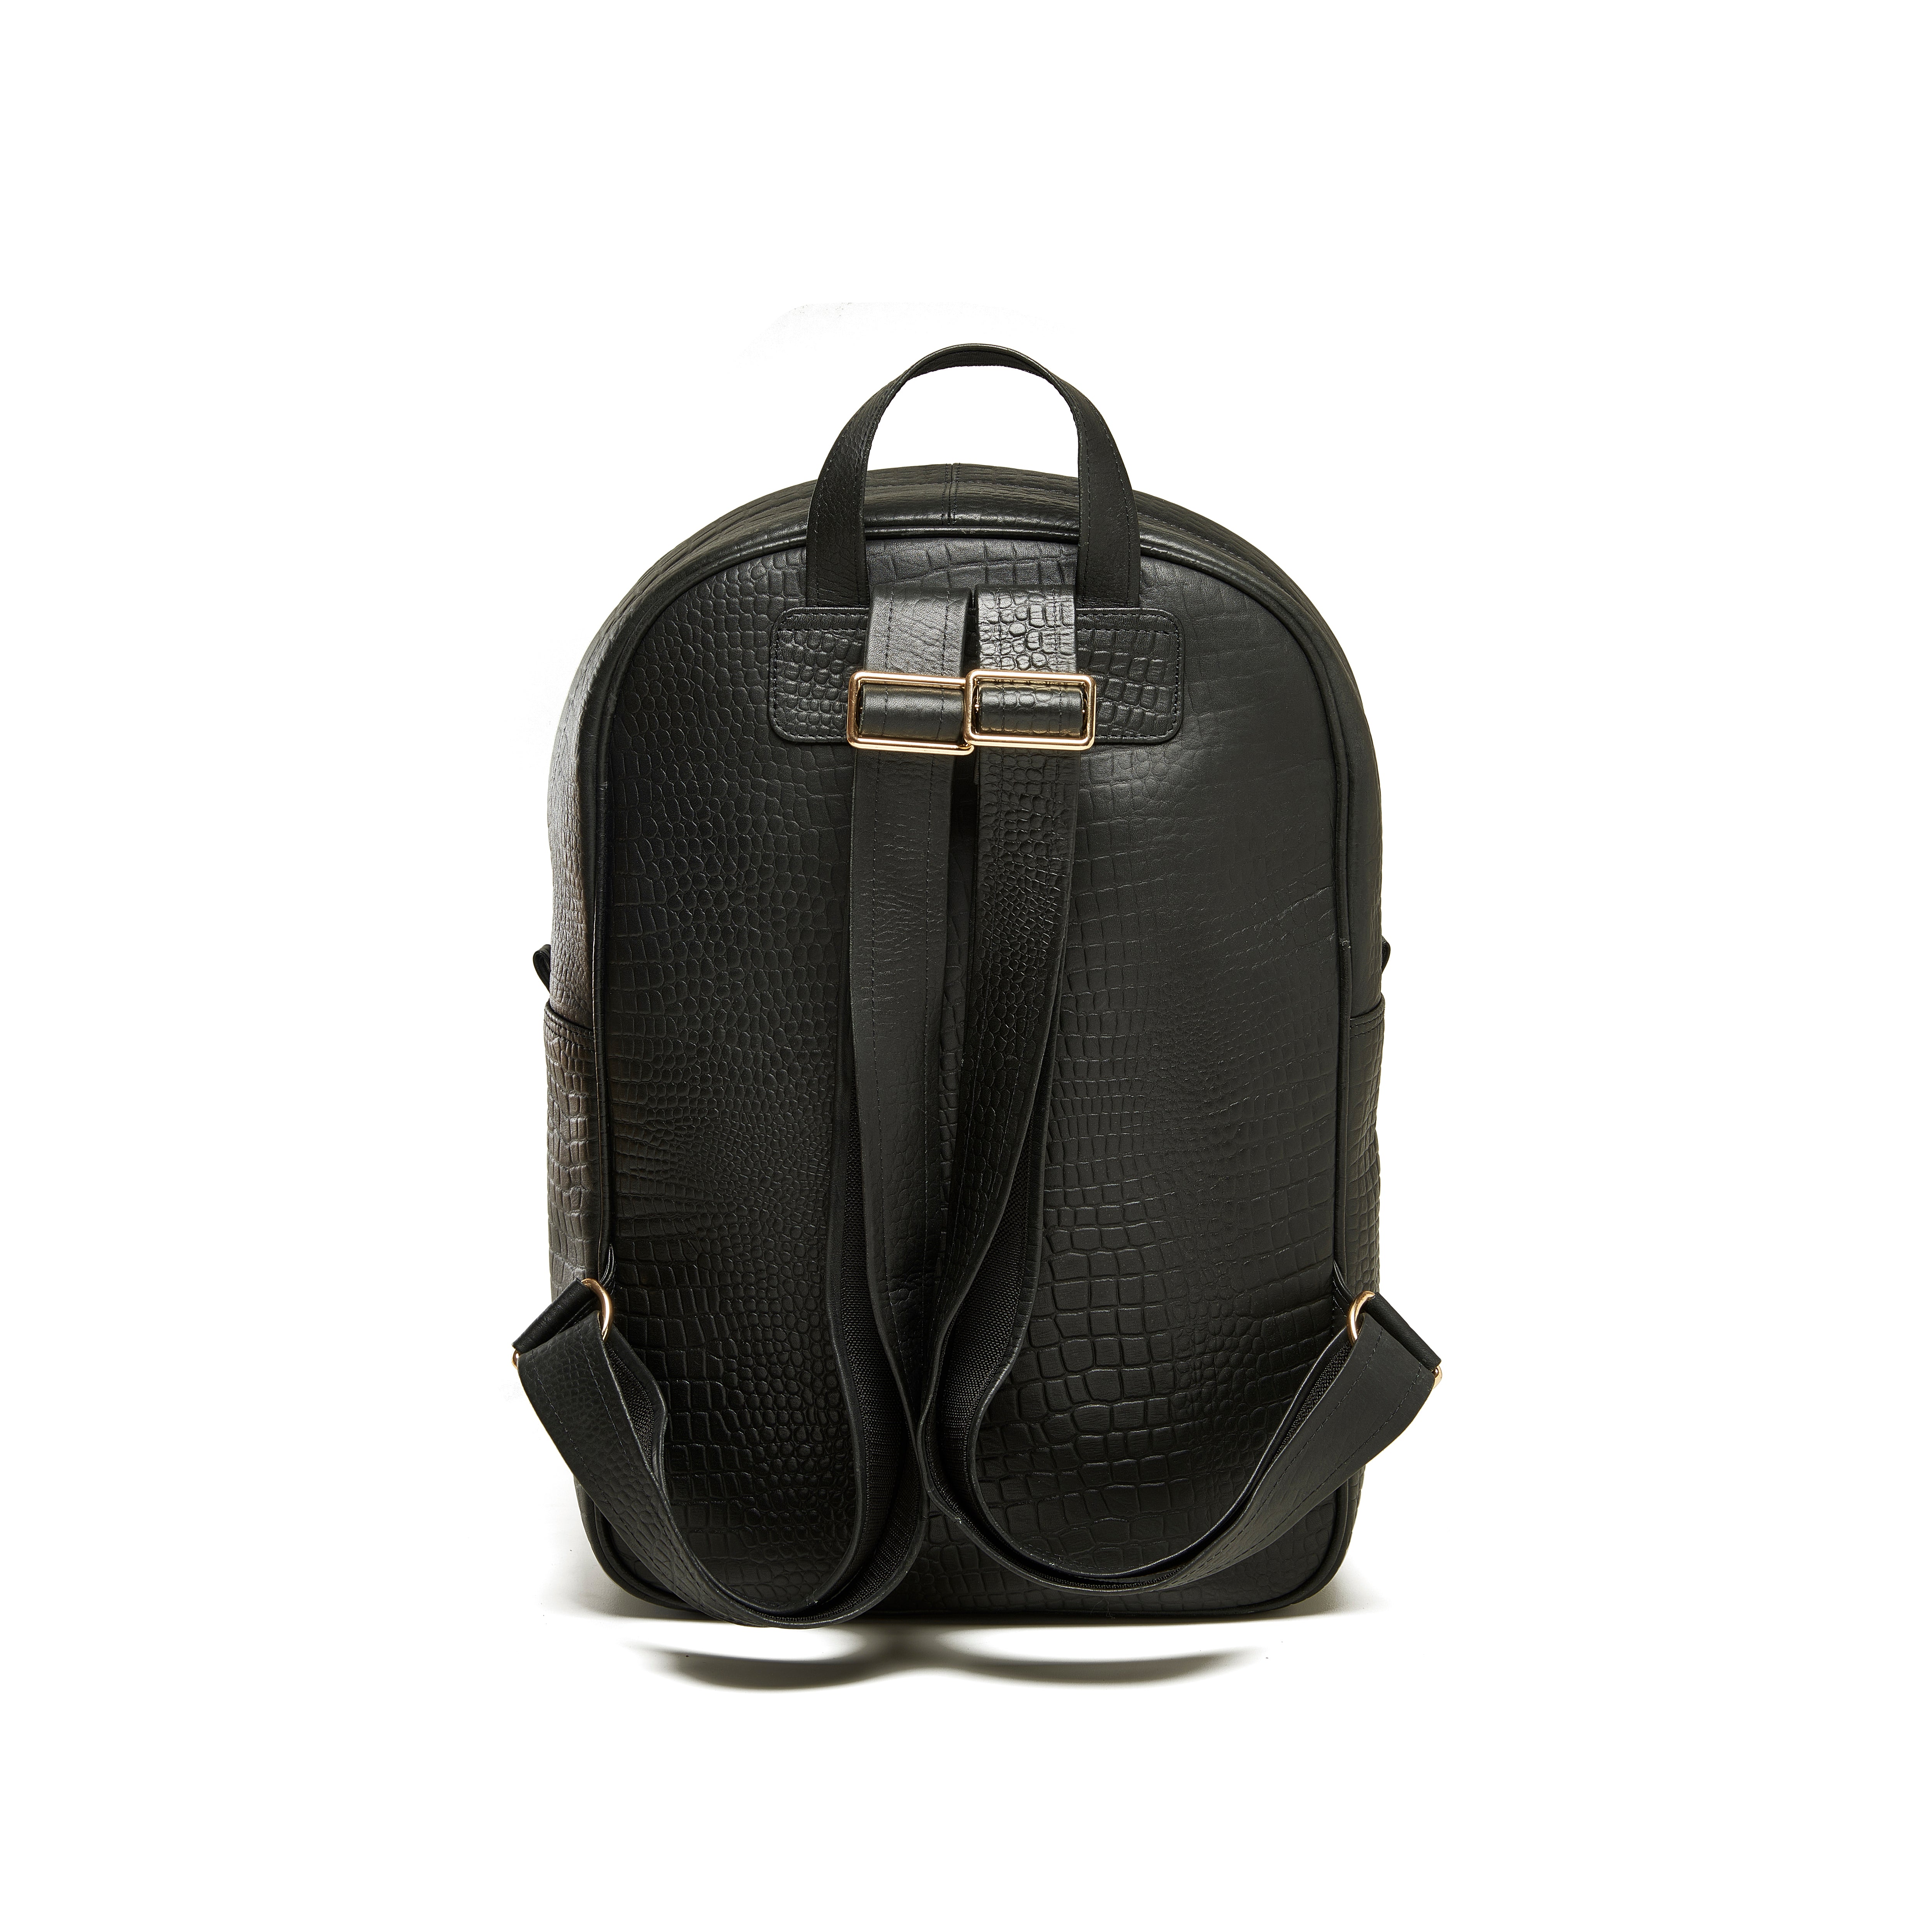 Easy Rider Large Leather Back Pack